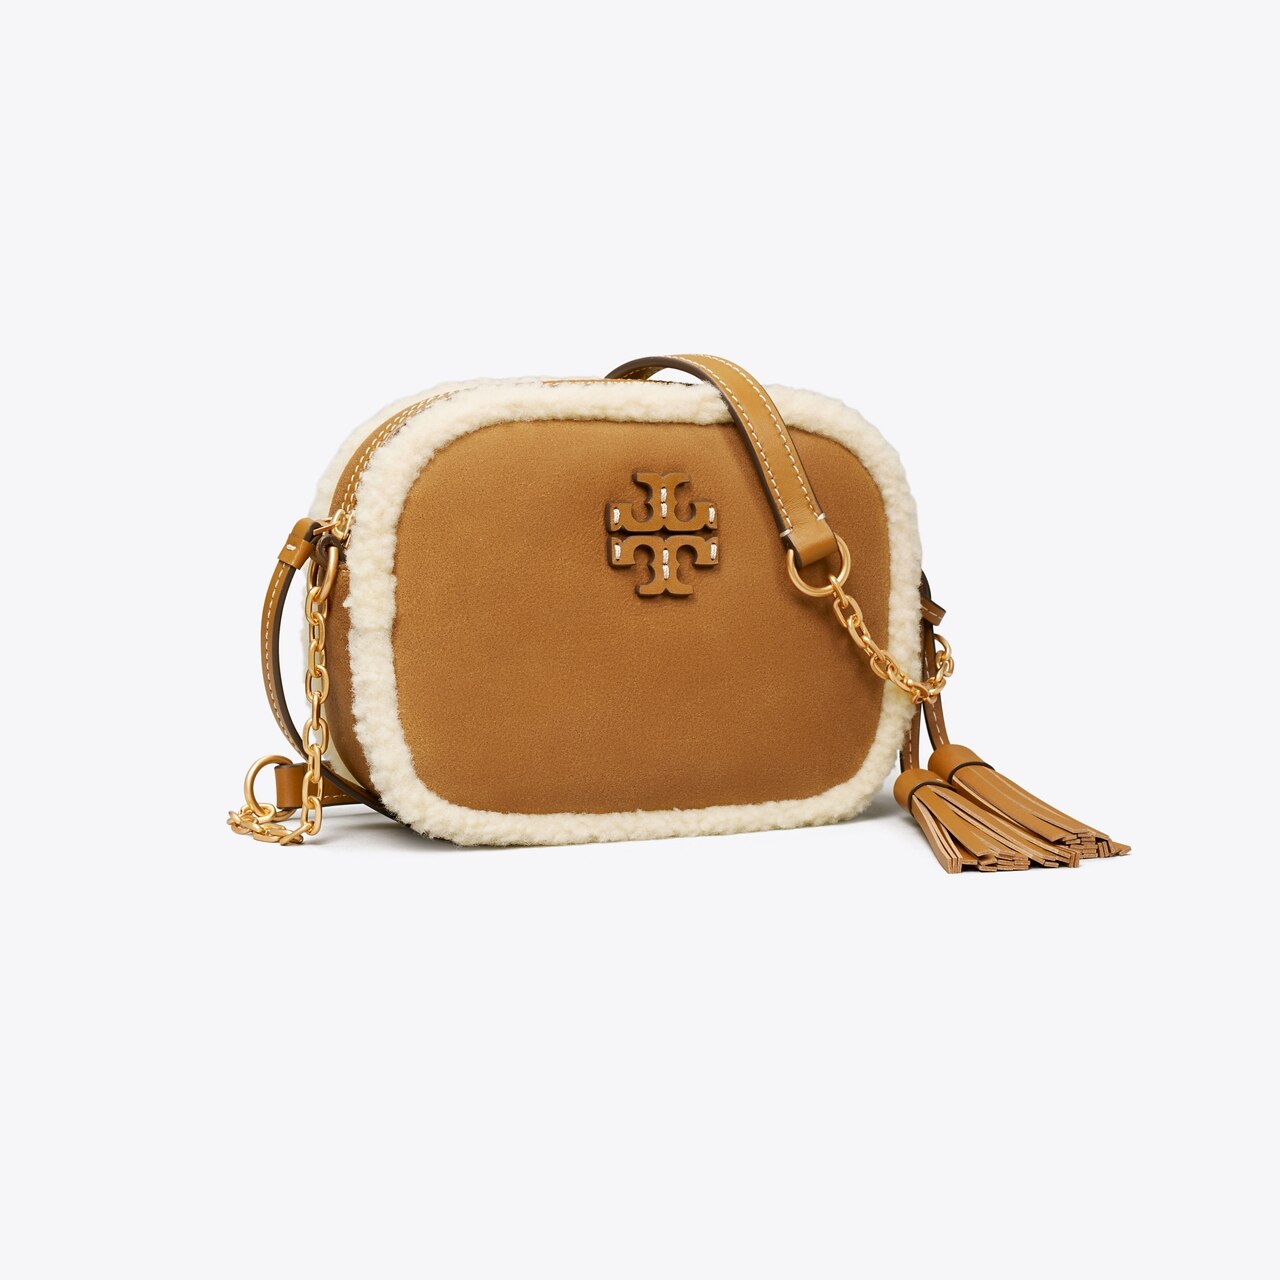 Tory Burch, Bags, Like New Carried Once Tory Burch Mcgraw Camera Bag